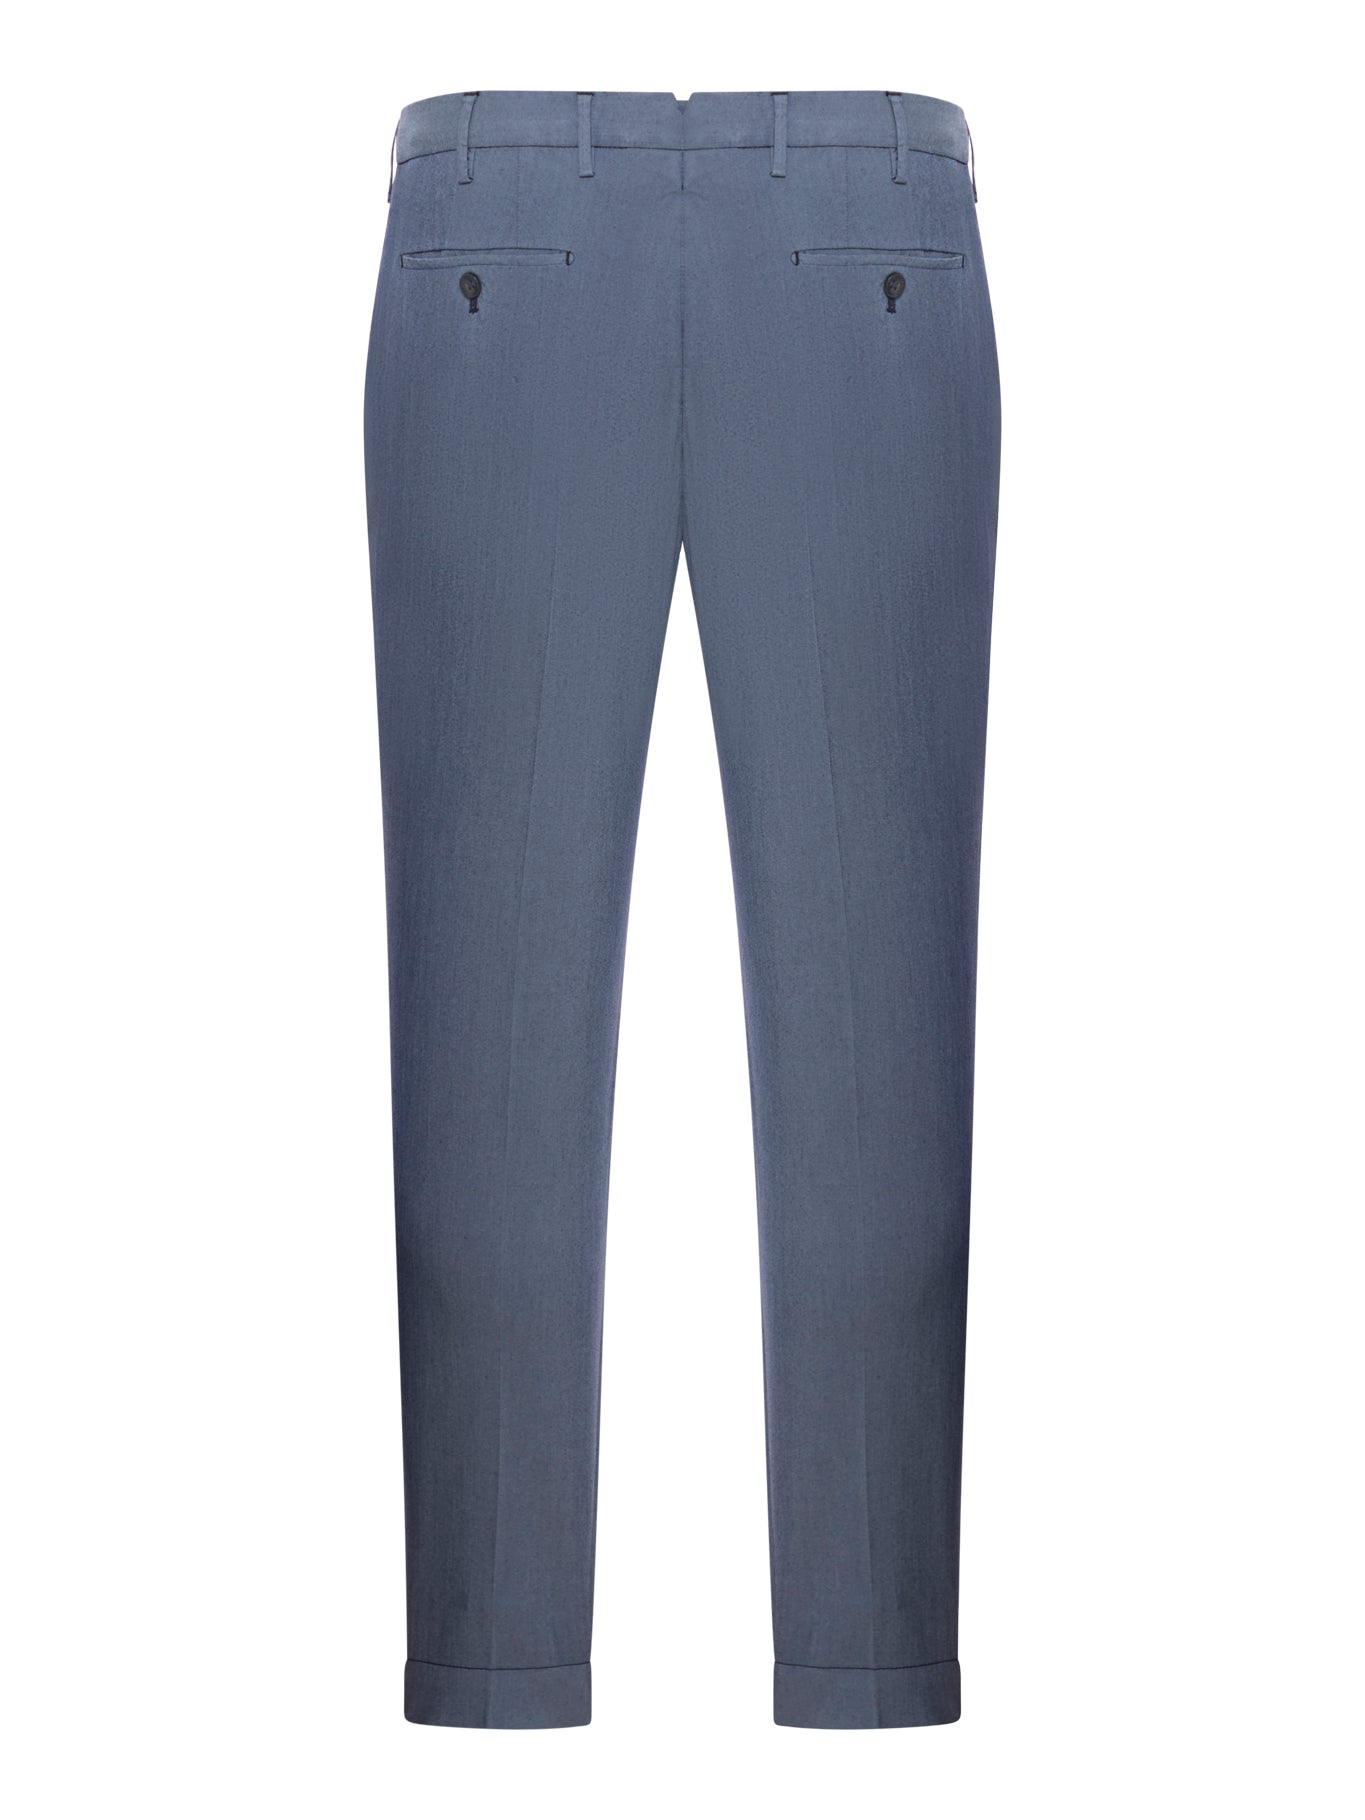 cotton trousers with pleats